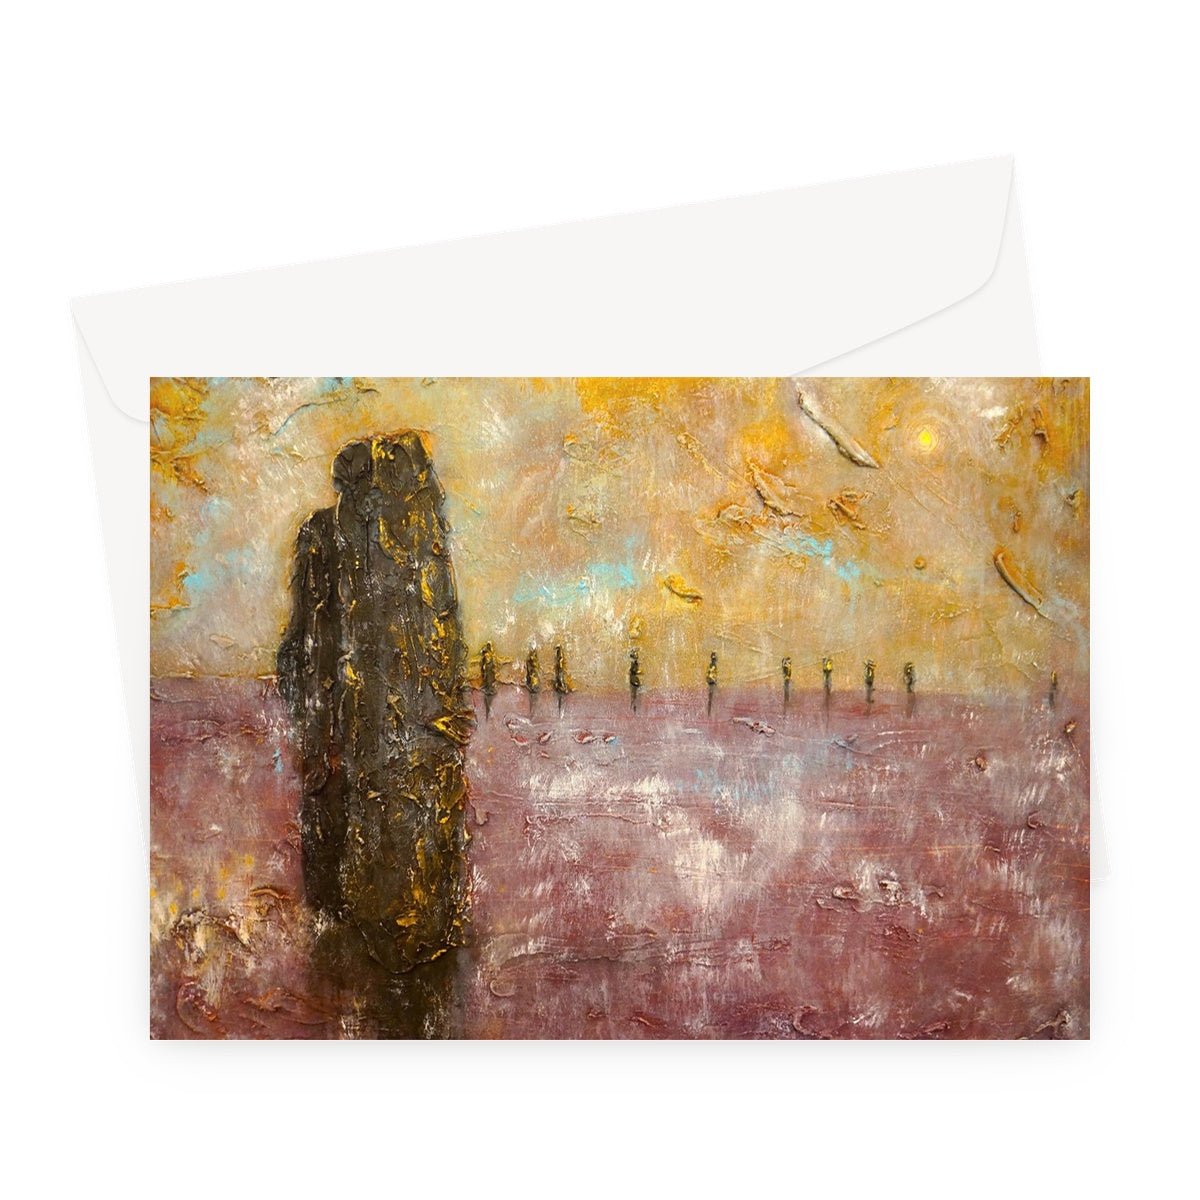 Bordgar Mist Orkney Art Gifts Greeting Card-Greetings Cards-Orkney Art Gallery-A5 Landscape-1 Card-Paintings, Prints, Homeware, Art Gifts From Scotland By Scottish Artist Kevin Hunter